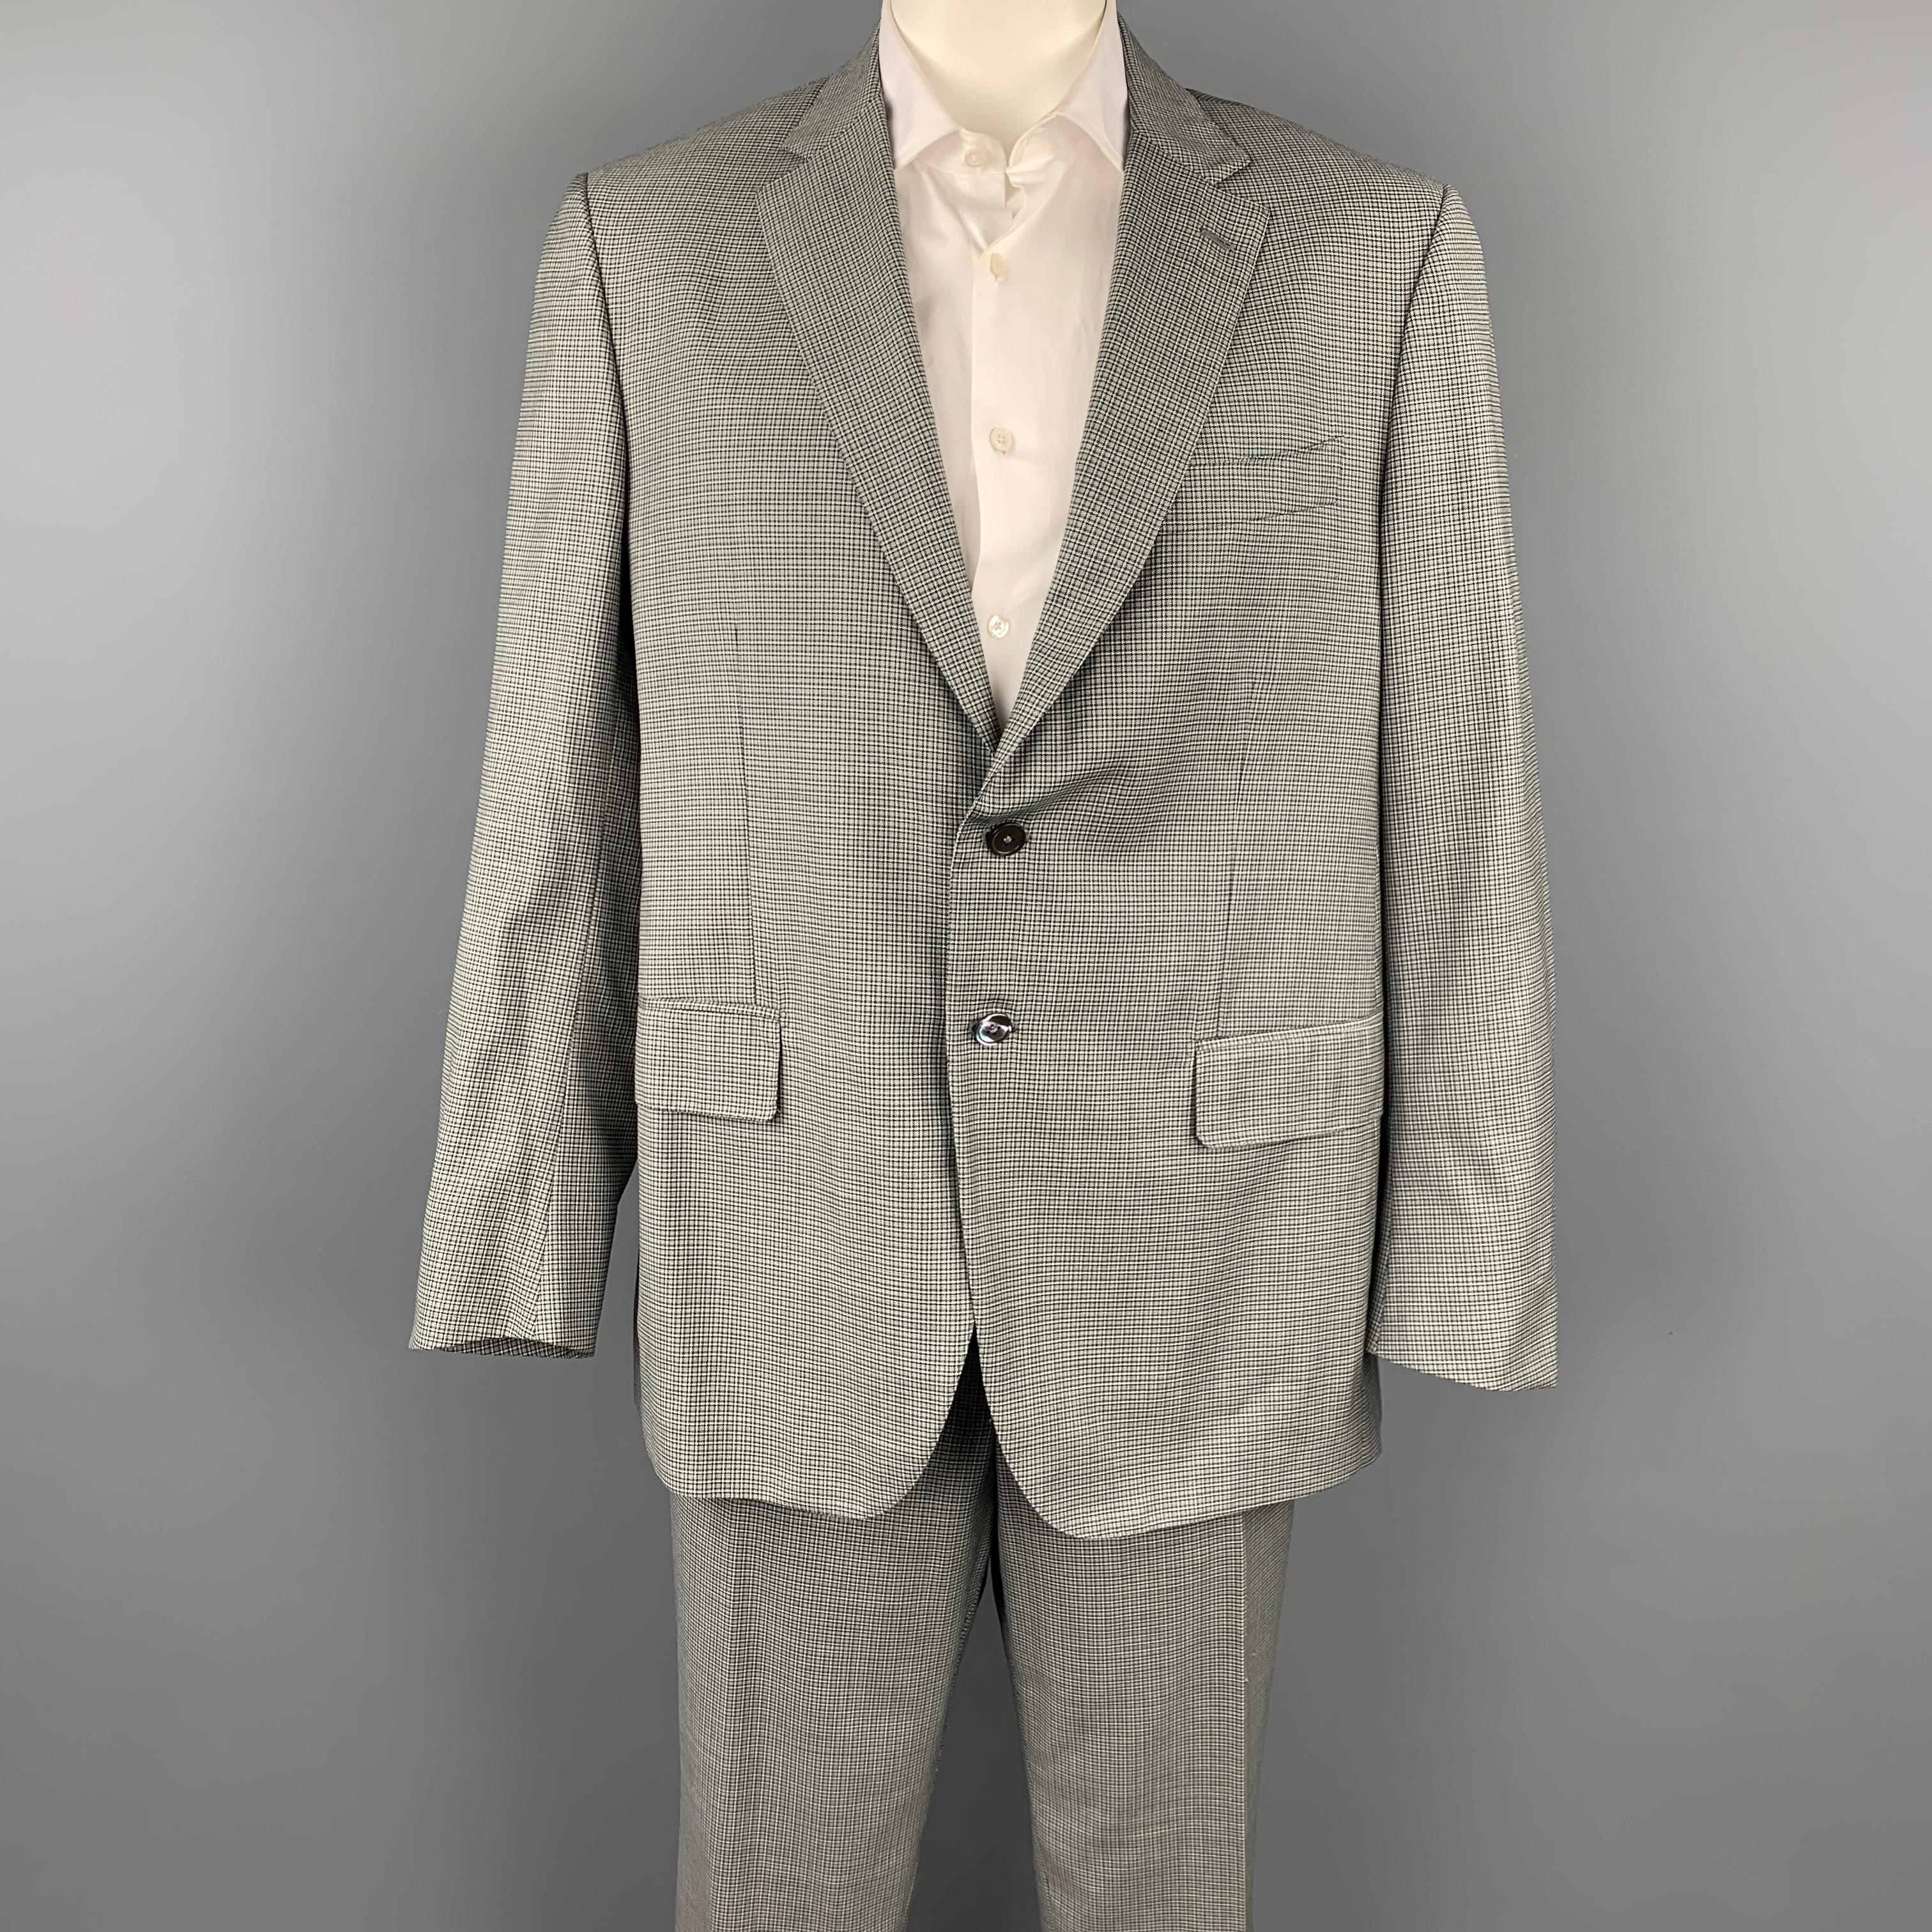 ISAIA suit comes in a light green & brown plaid wool with a full liner and includes a single breasted, two button sport coat with a notch lapel and matching flat front trousers. Made in Italy.

Very Good Pre-Owned Condition.
Marked: 58